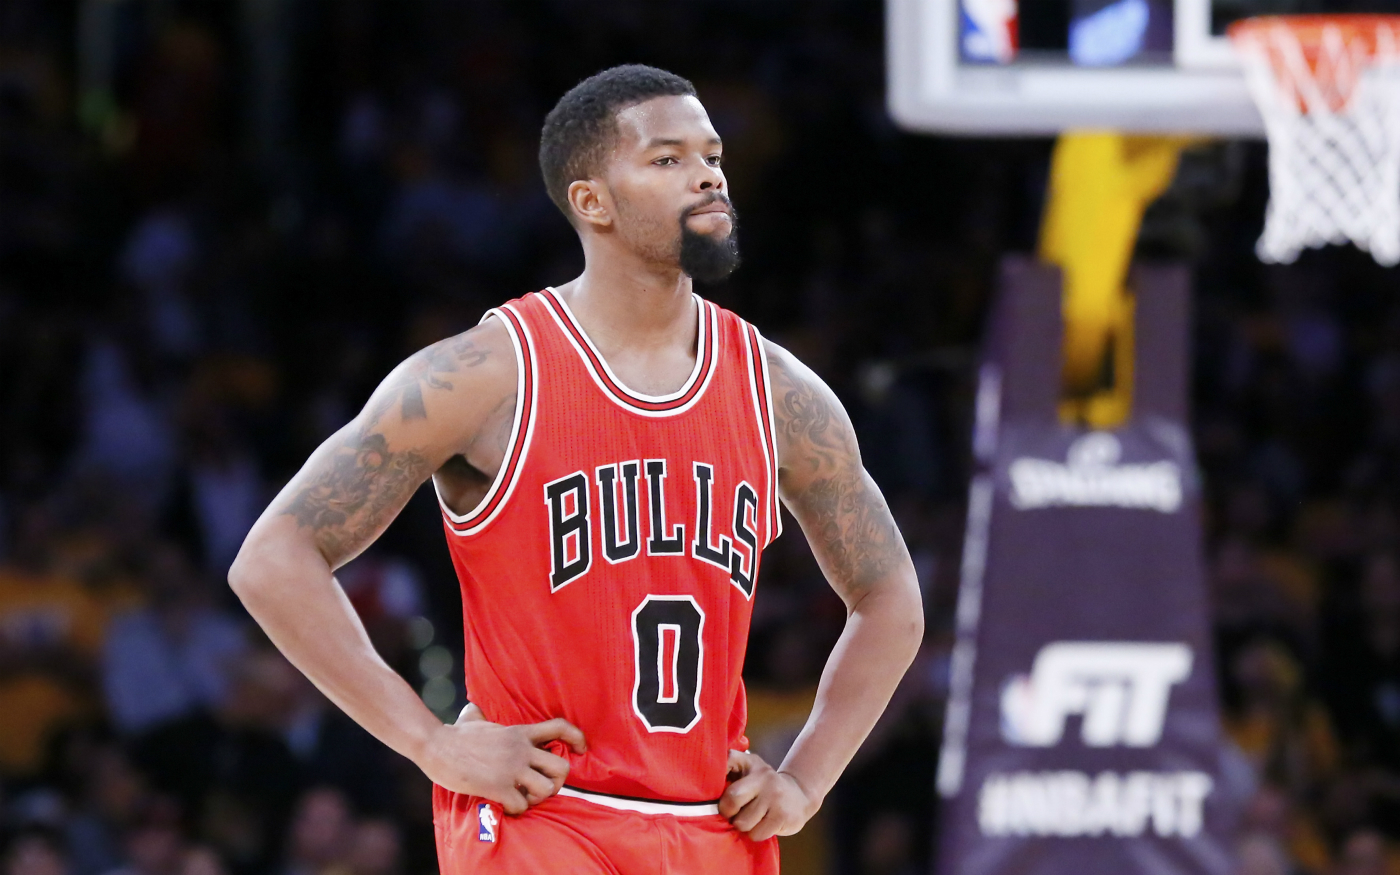 Aaron Brooks rejoint les Indiana Pacers